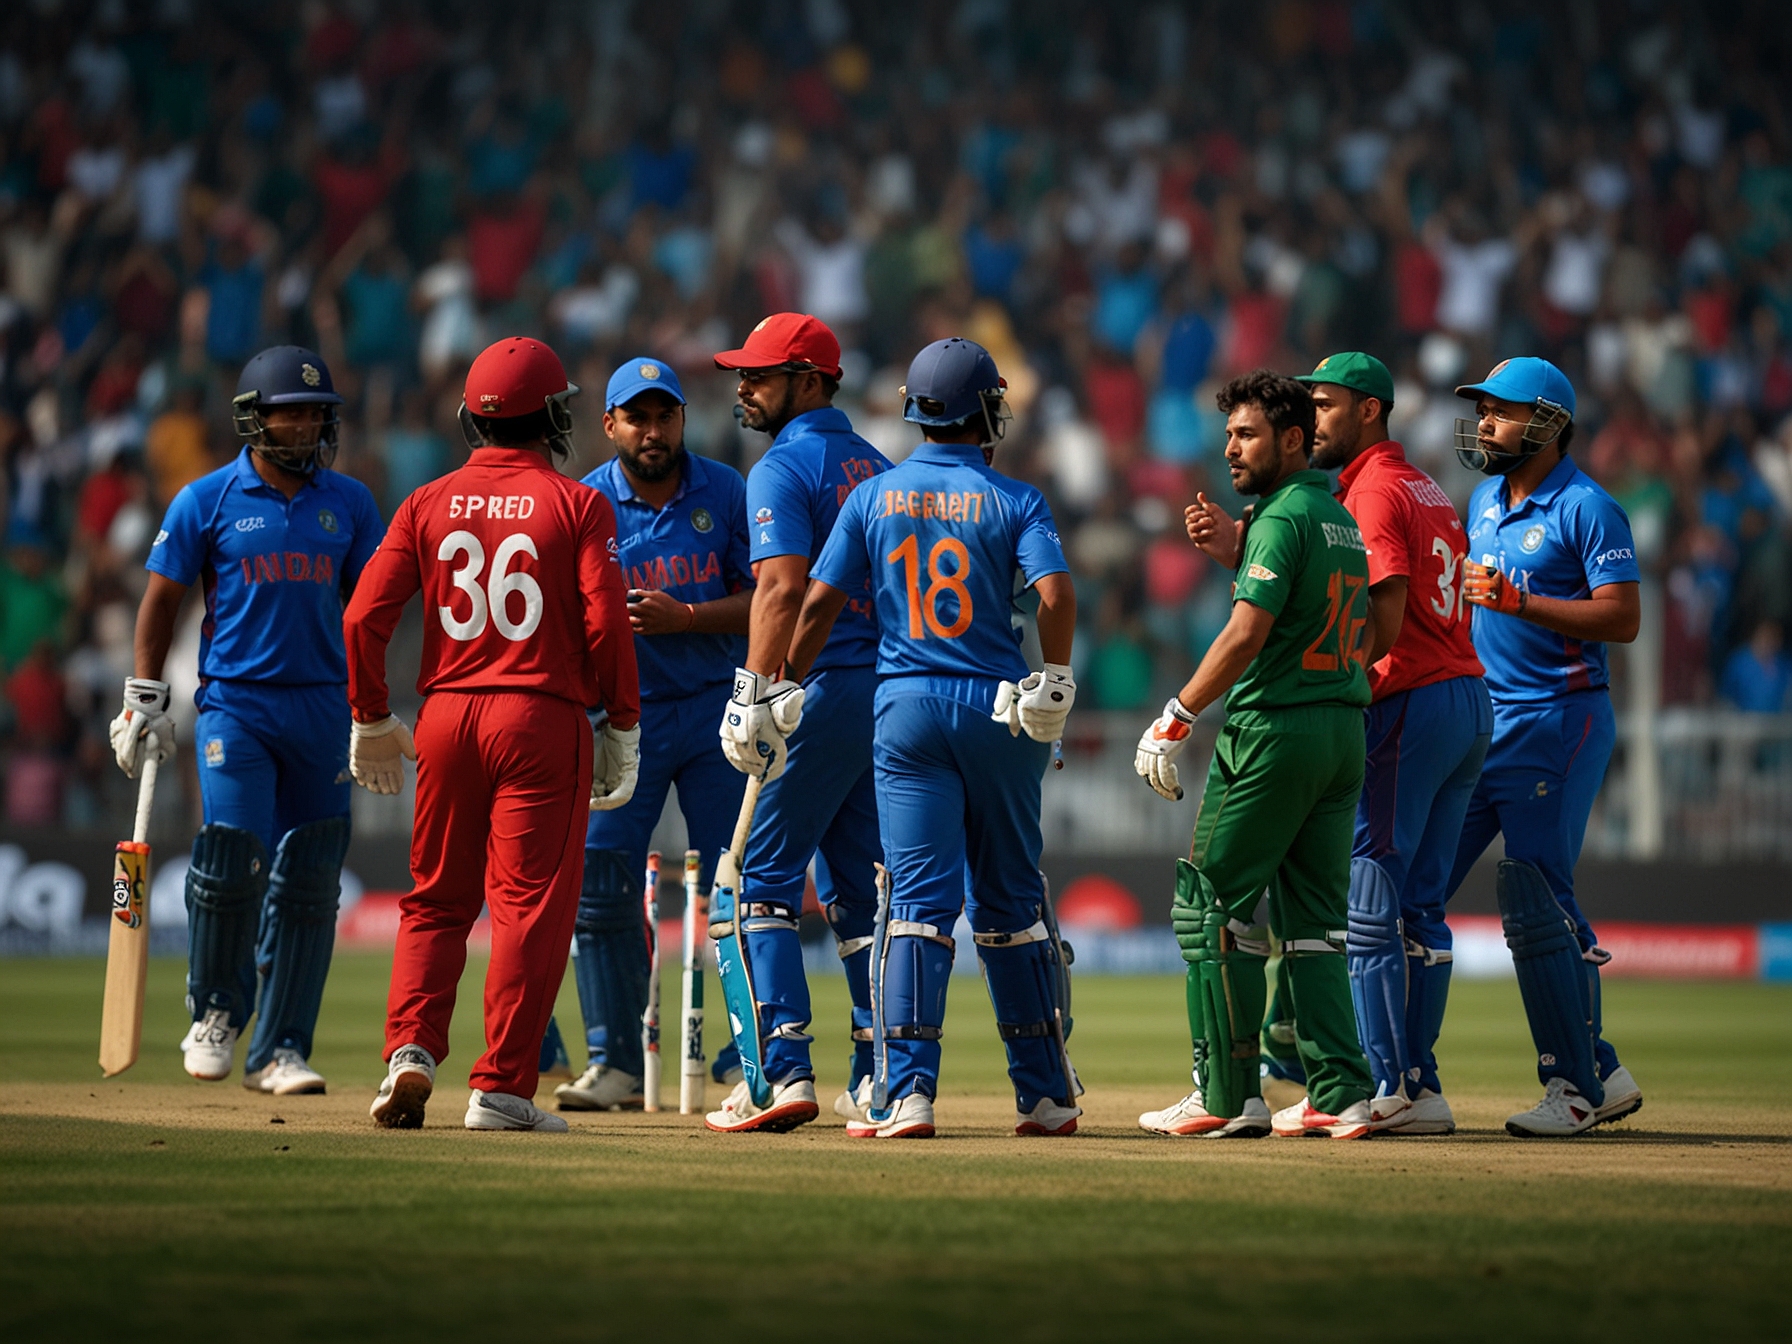 Bangladesh and Afghanistan cricket teams in action on the field, capturing the intensity and competitive spirit as they vie for a crucial win in the T20 World Cup 2024 group stages.